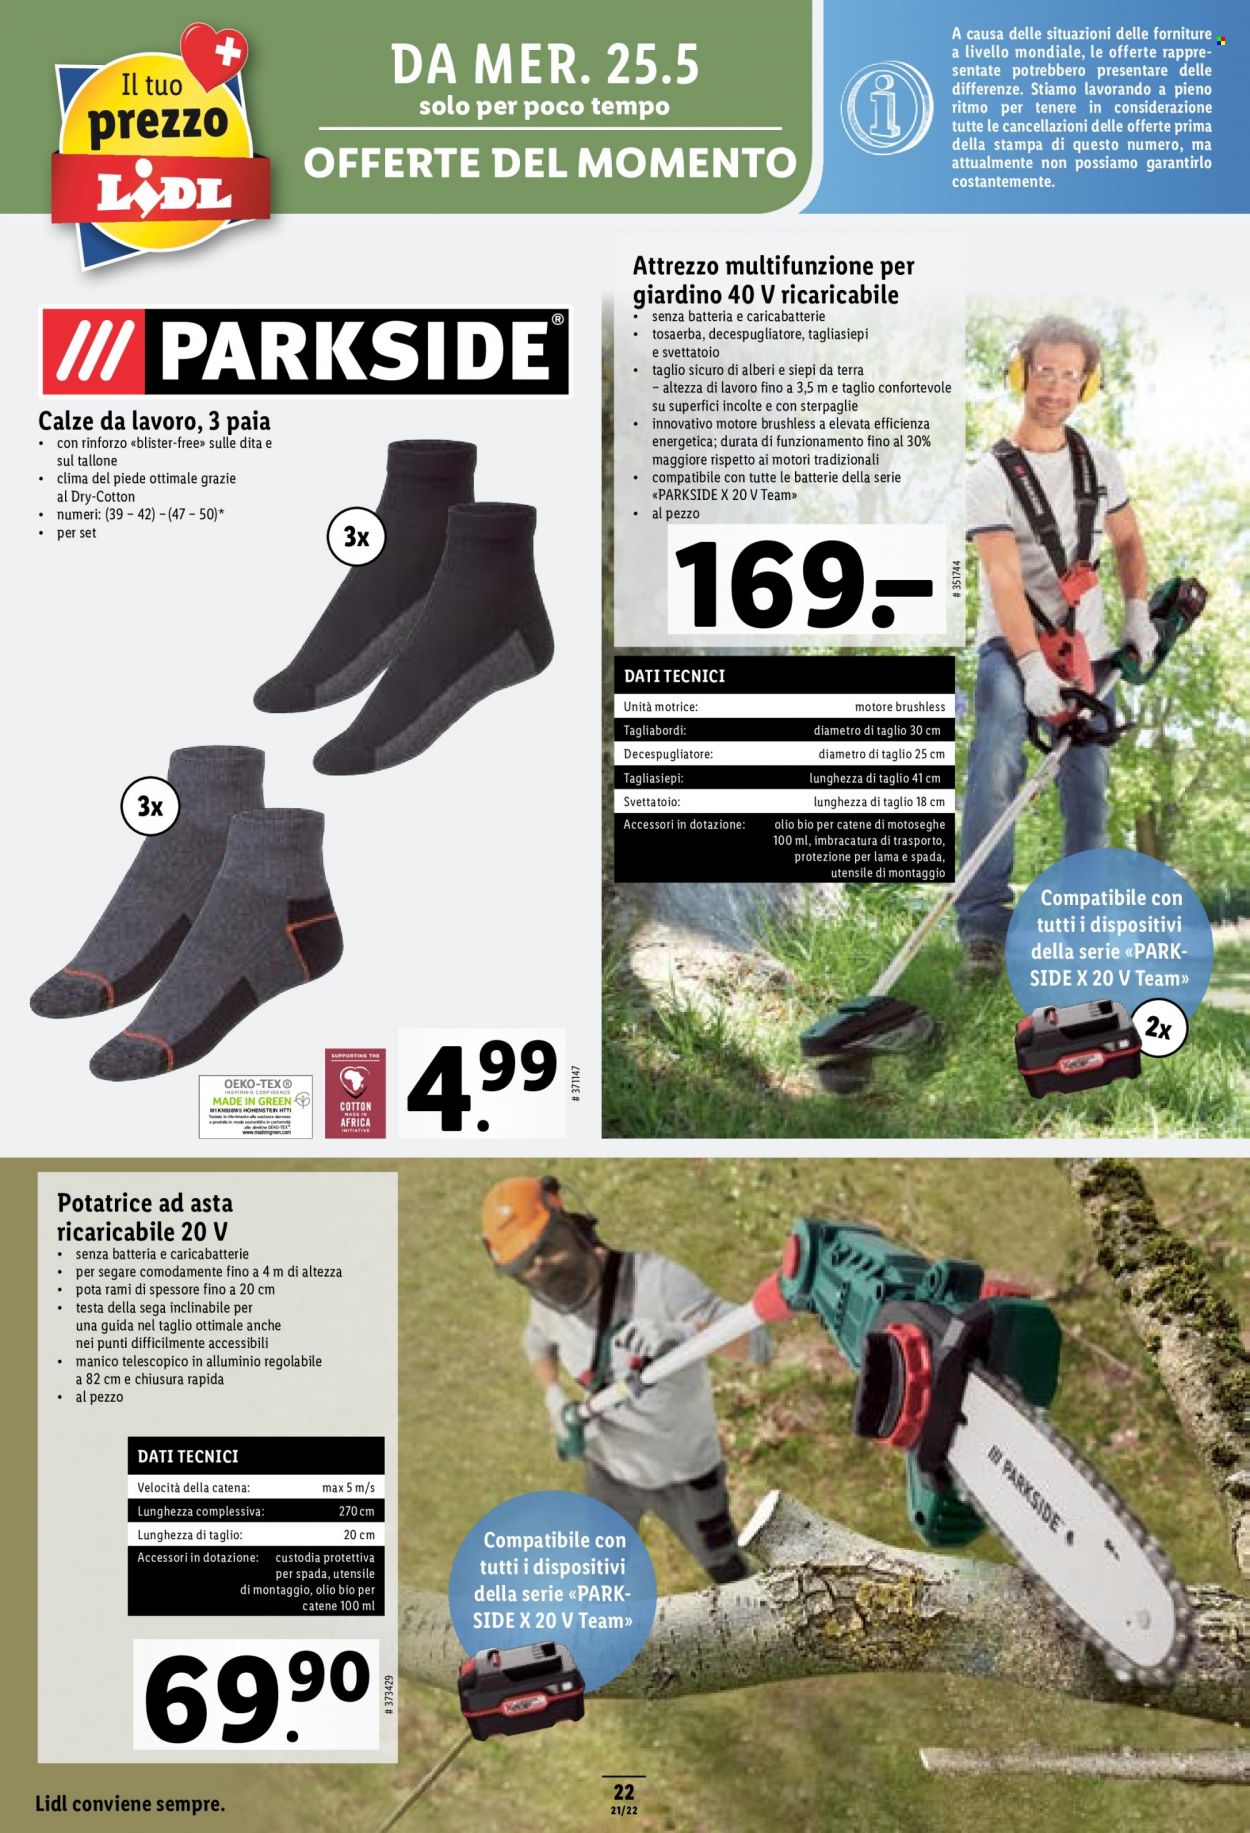 Catalogue Lidl - 25.5.2022 - 1.6.2022. Page 22.